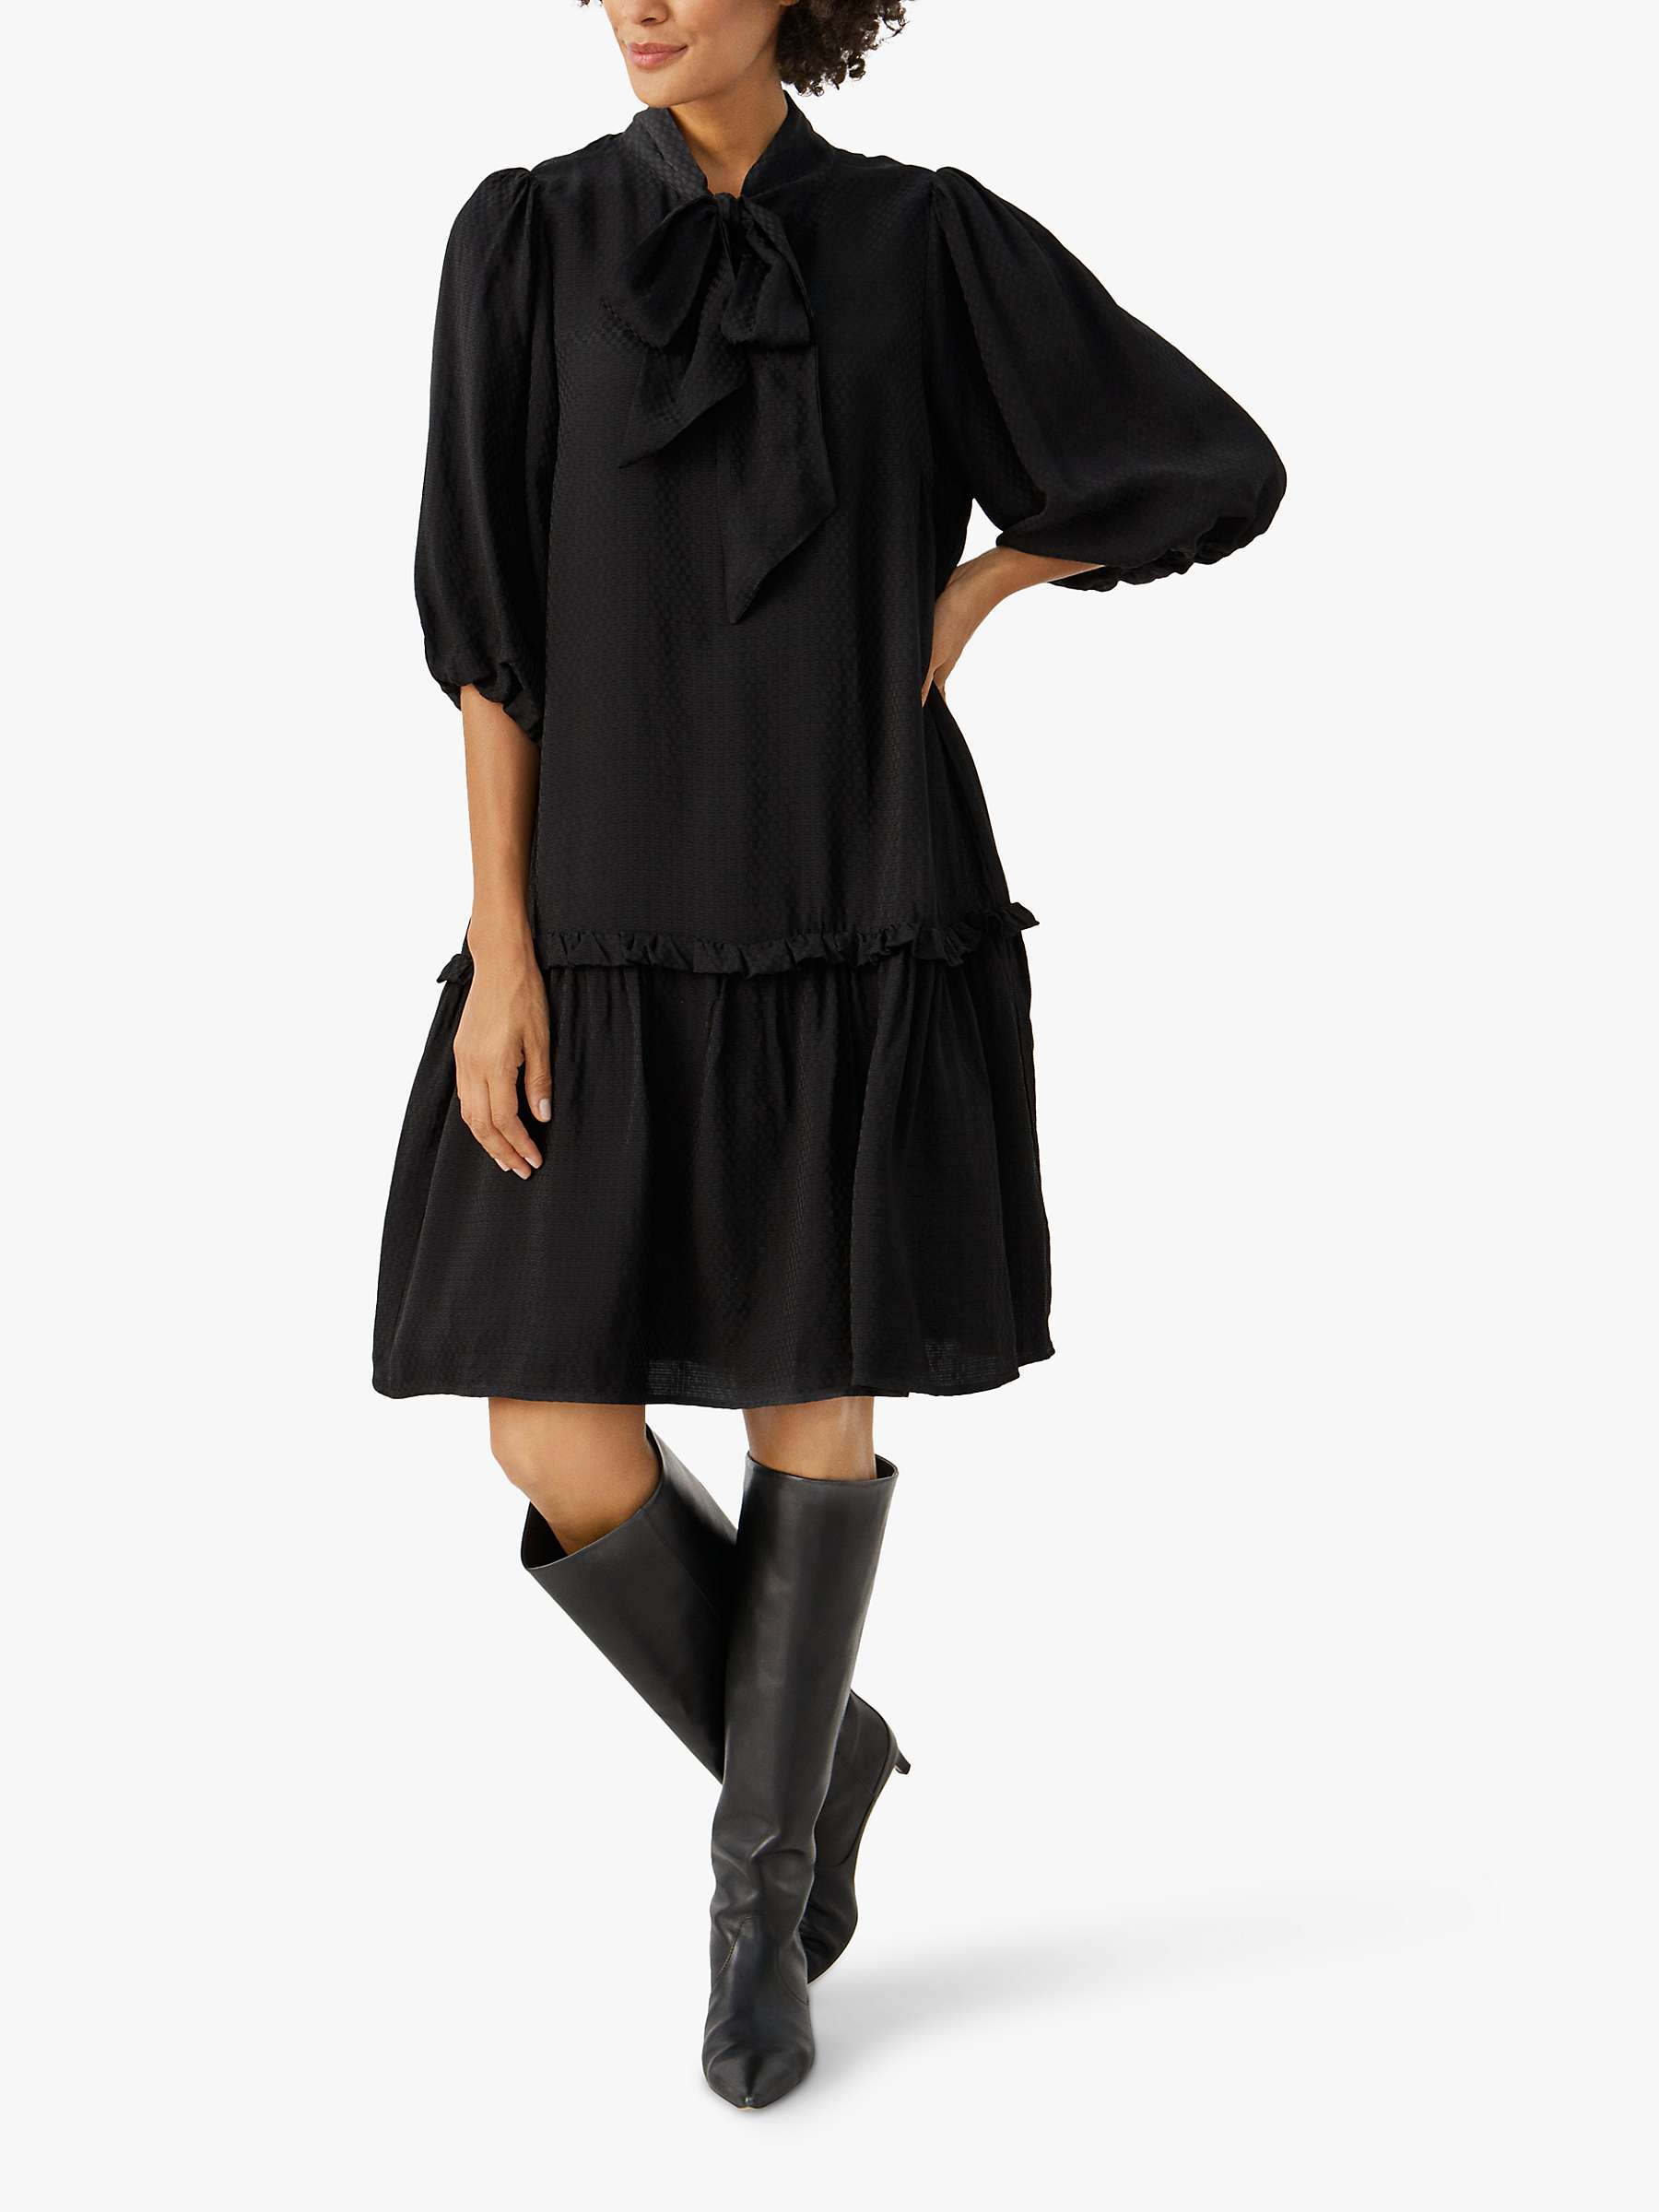 Buy Part Two Tisha Relaxed Fit Half Sleeve Knee Length Dress, Black Online at johnlewis.com